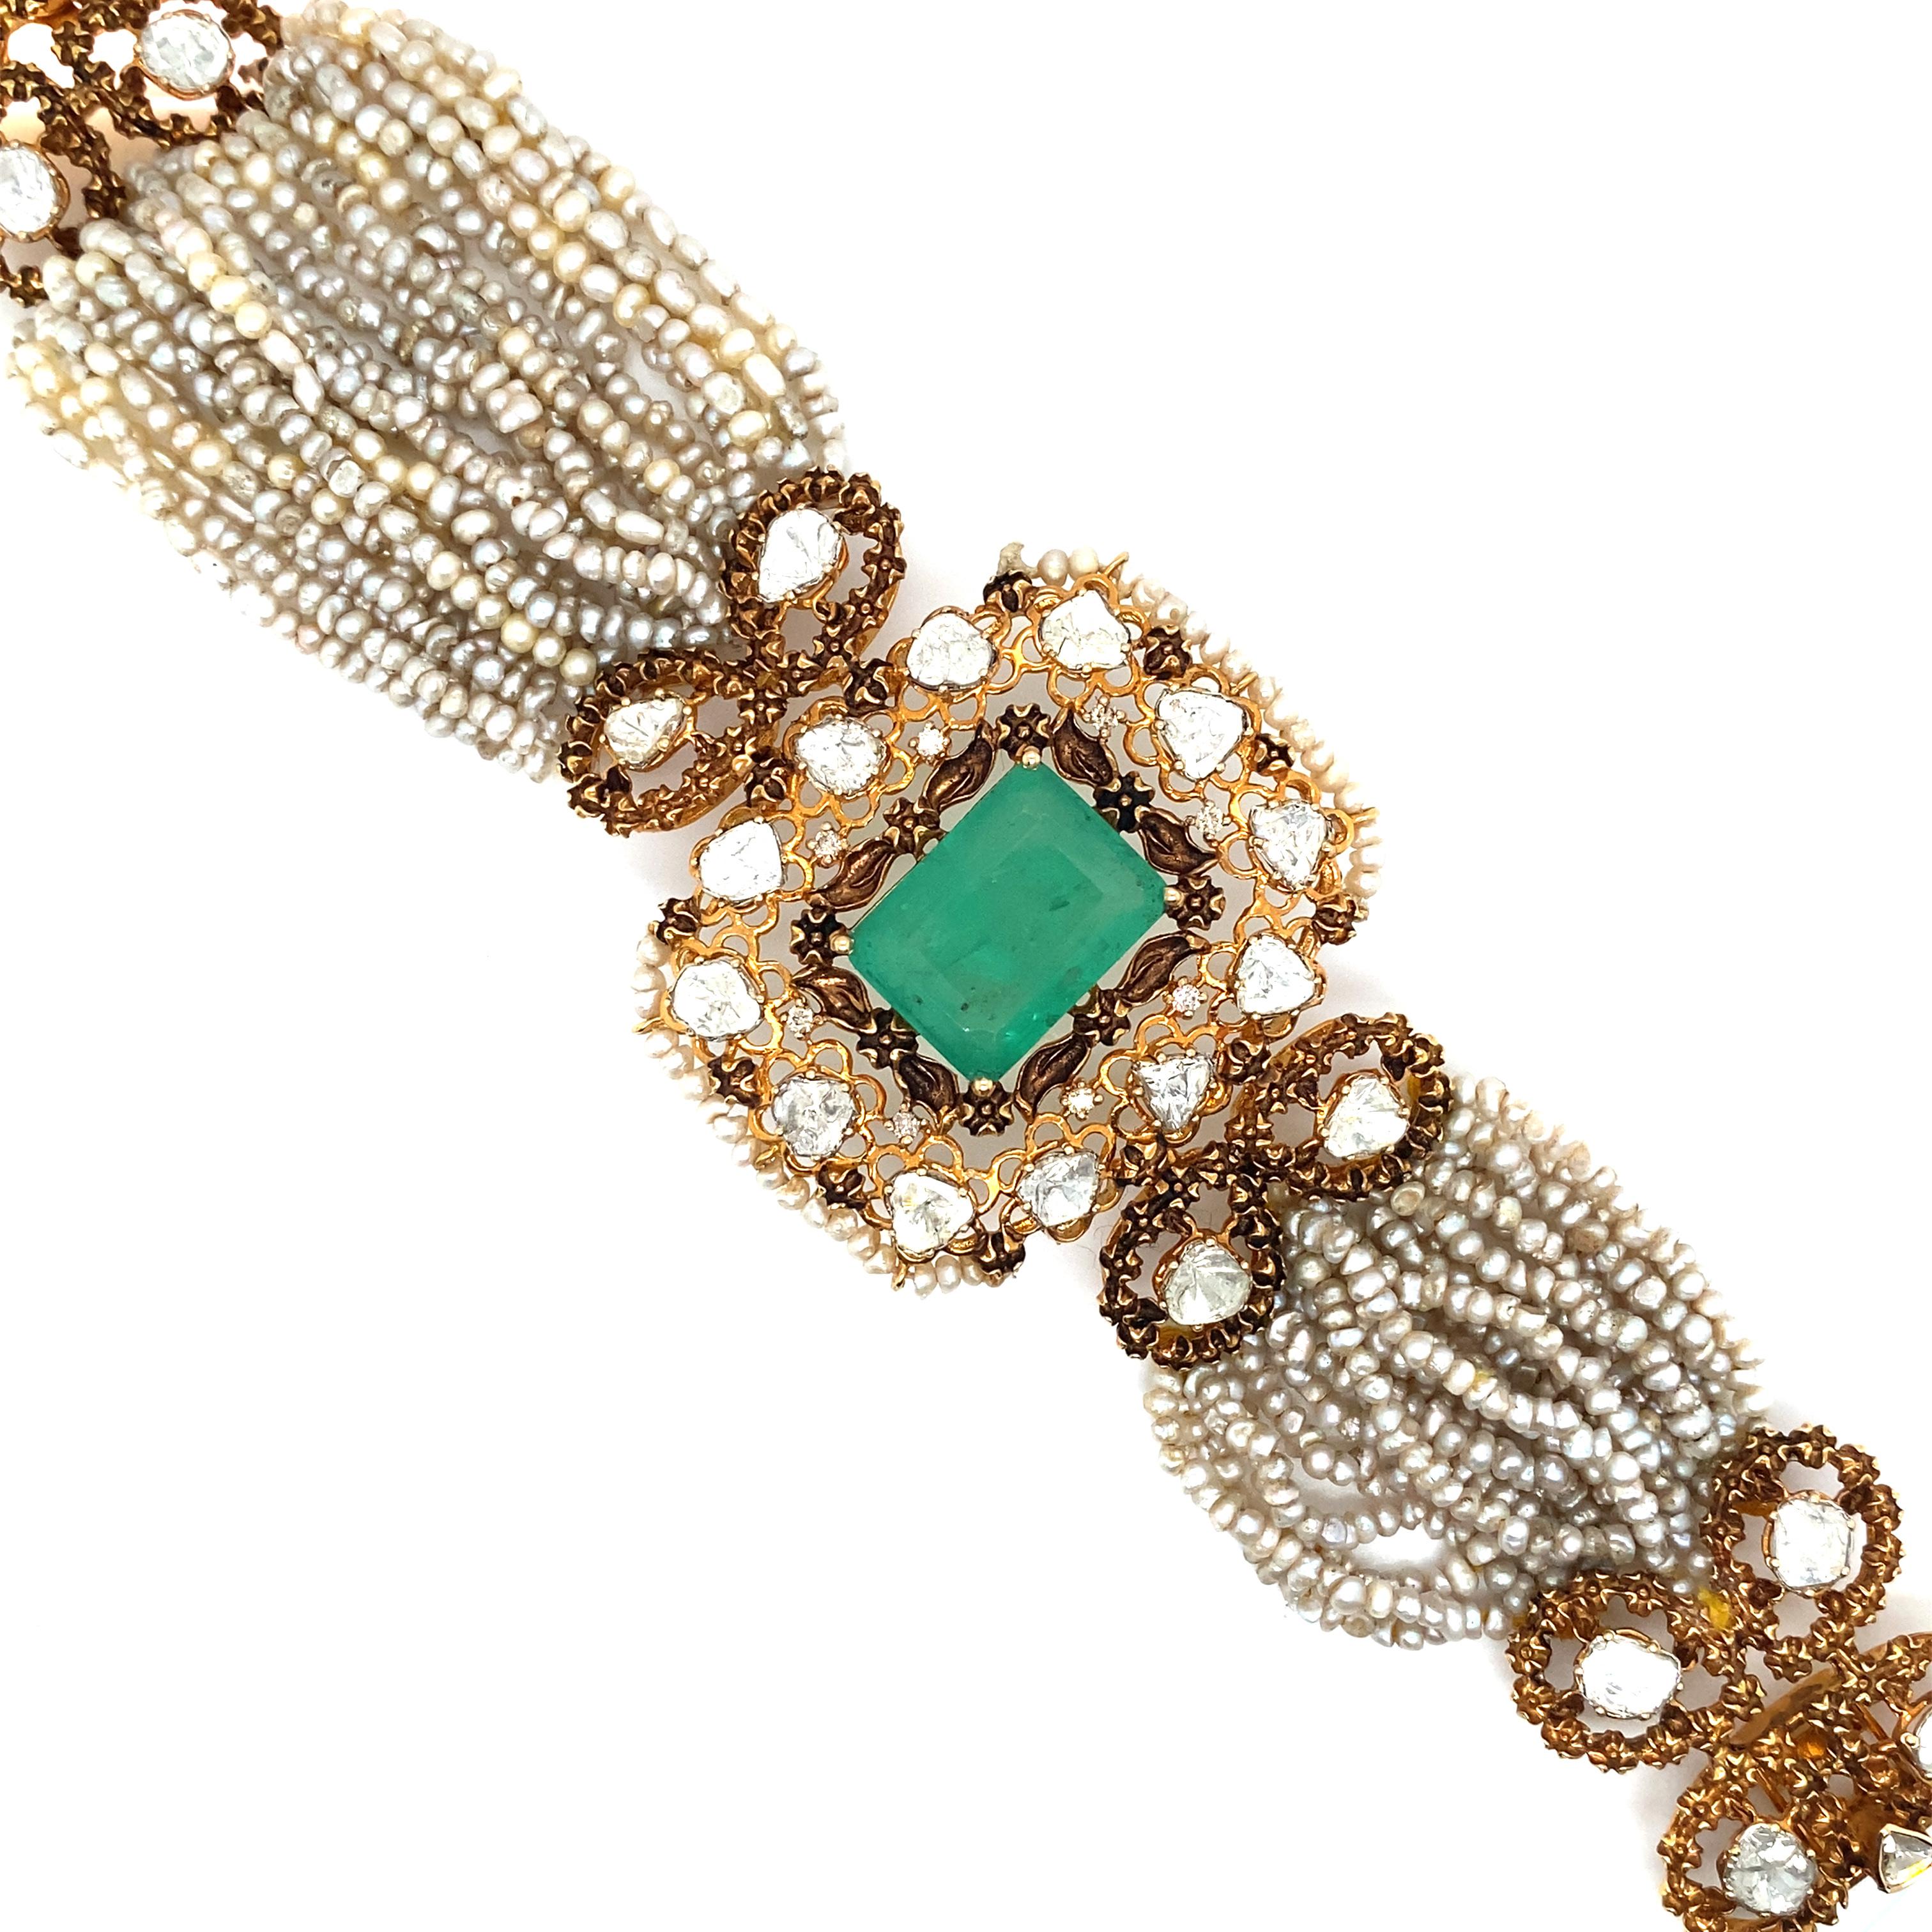 Victorian Revival Seed Pearl and Emerald Bracelet in 14 Karat Gold, circa 1950s  For Sale 1